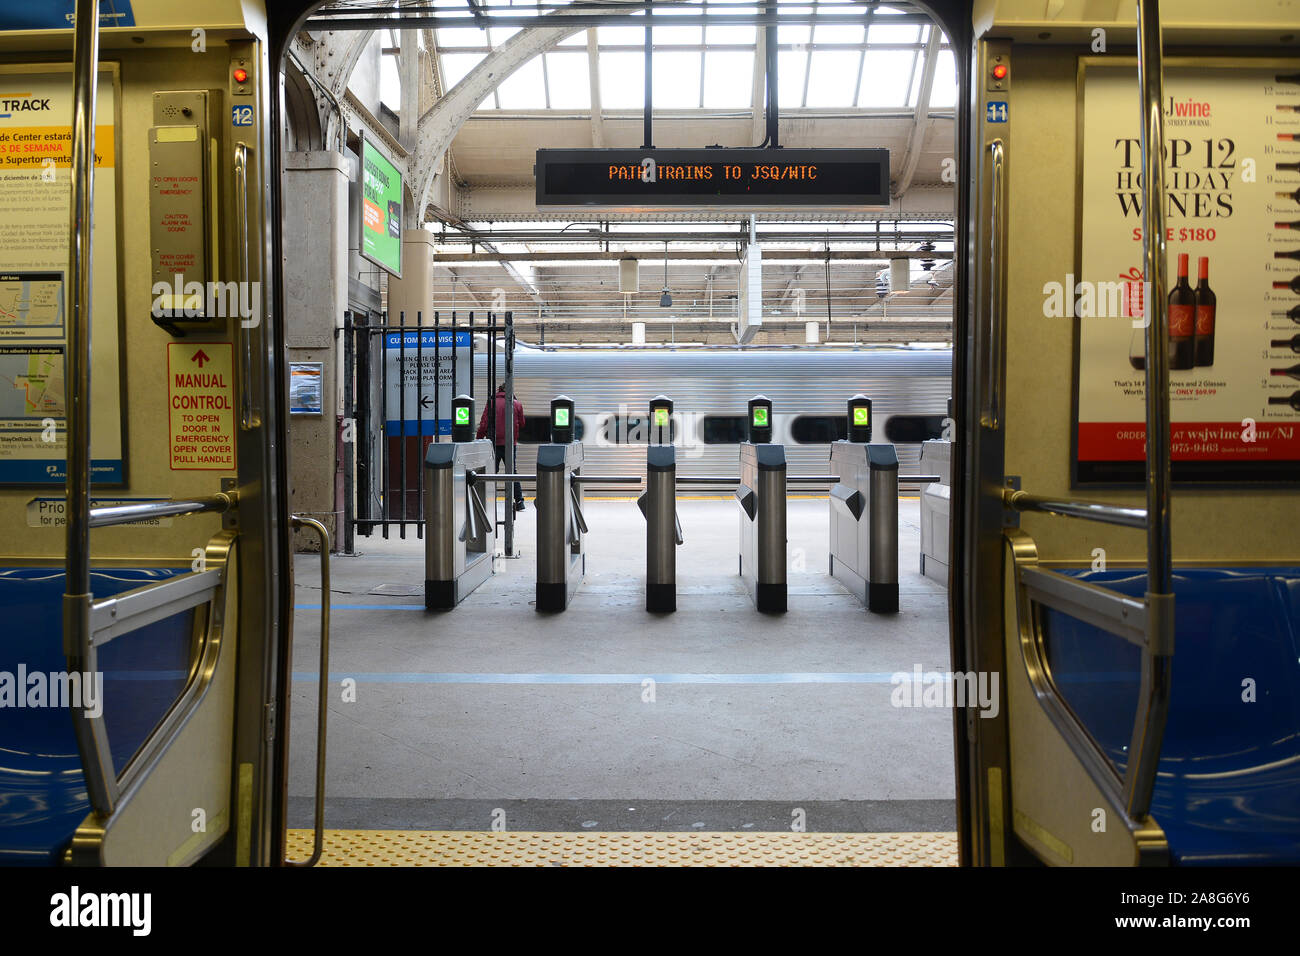 NEWARK, NJ - 05 NOV 2019: View from inside a Path Train with the doors open looking onto the paltform with turnstiles and passing train. Stock Photo